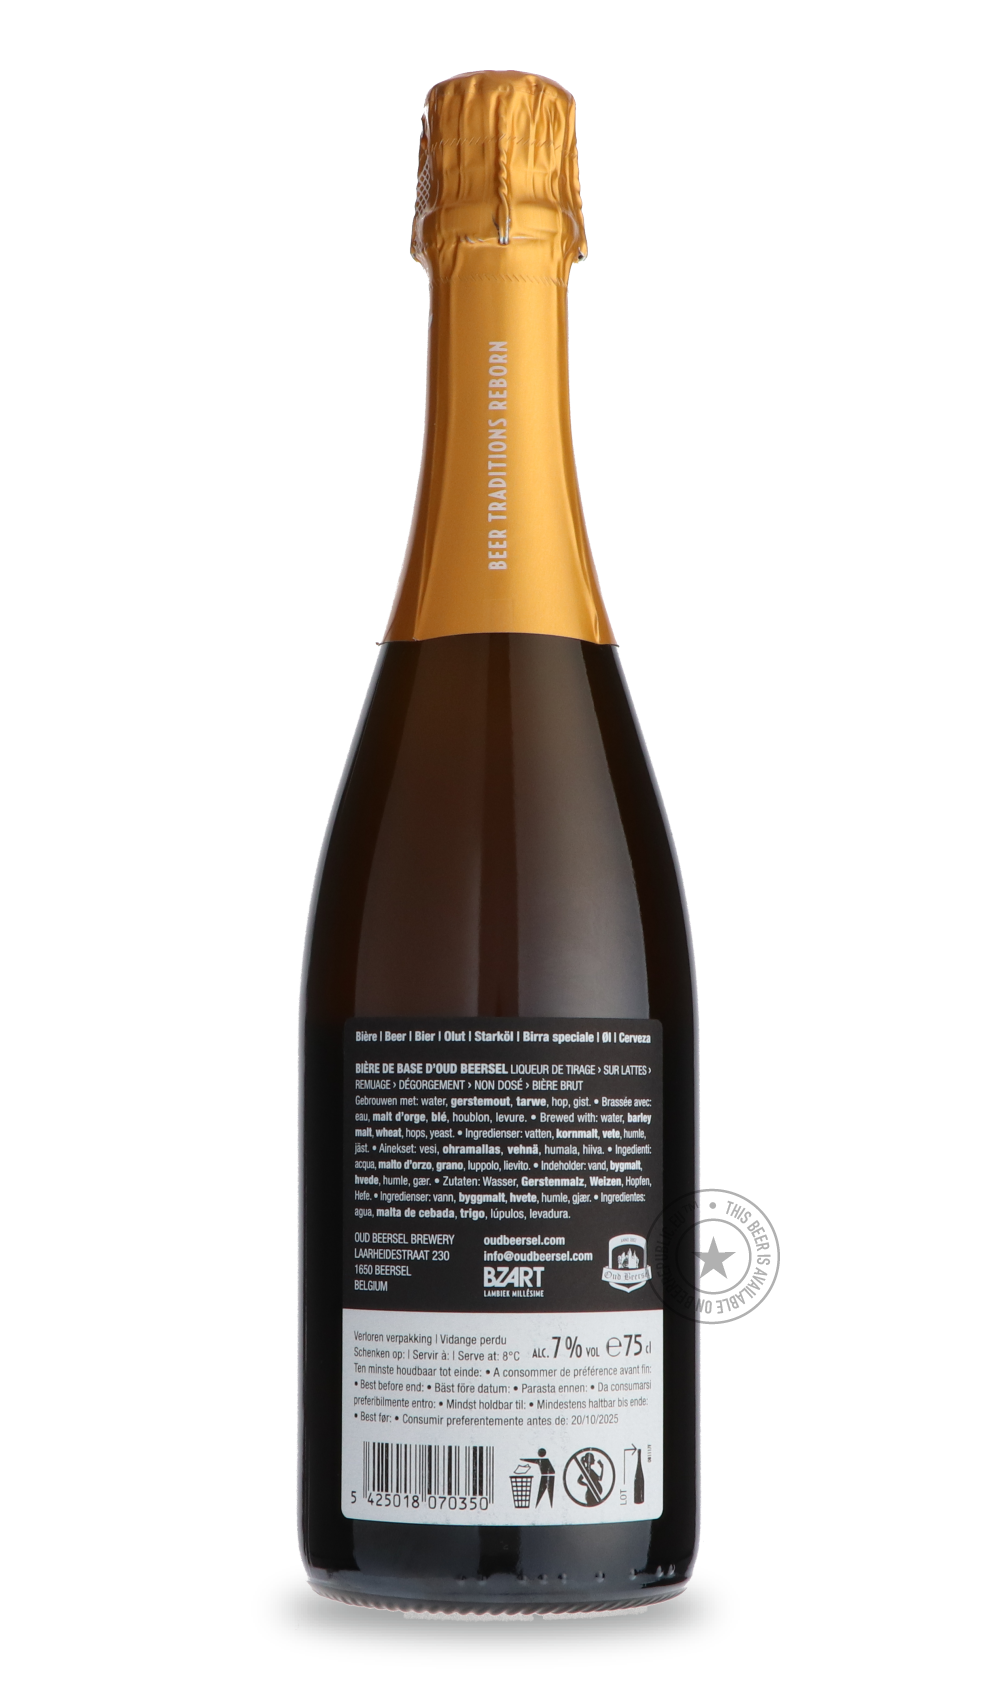 -Oud Beersel- Bzart Lambiek Millésime 2018-Sour / Wild & Fruity- Only @ Beer Republic - The best online beer store for American & Canadian craft beer - Buy beer online from the USA and Canada - Bier online kopen - Amerikaans bier kopen - Craft beer store - Craft beer kopen - Amerikanisch bier kaufen - Bier online kaufen - Acheter biere online - IPA - Stout - Porter - New England IPA - Hazy IPA - Imperial Stout - Barrel Aged - Barrel Aged Imperial Stout - Brown - Dark beer - Blond - Blonde - Pilsner - Lager 